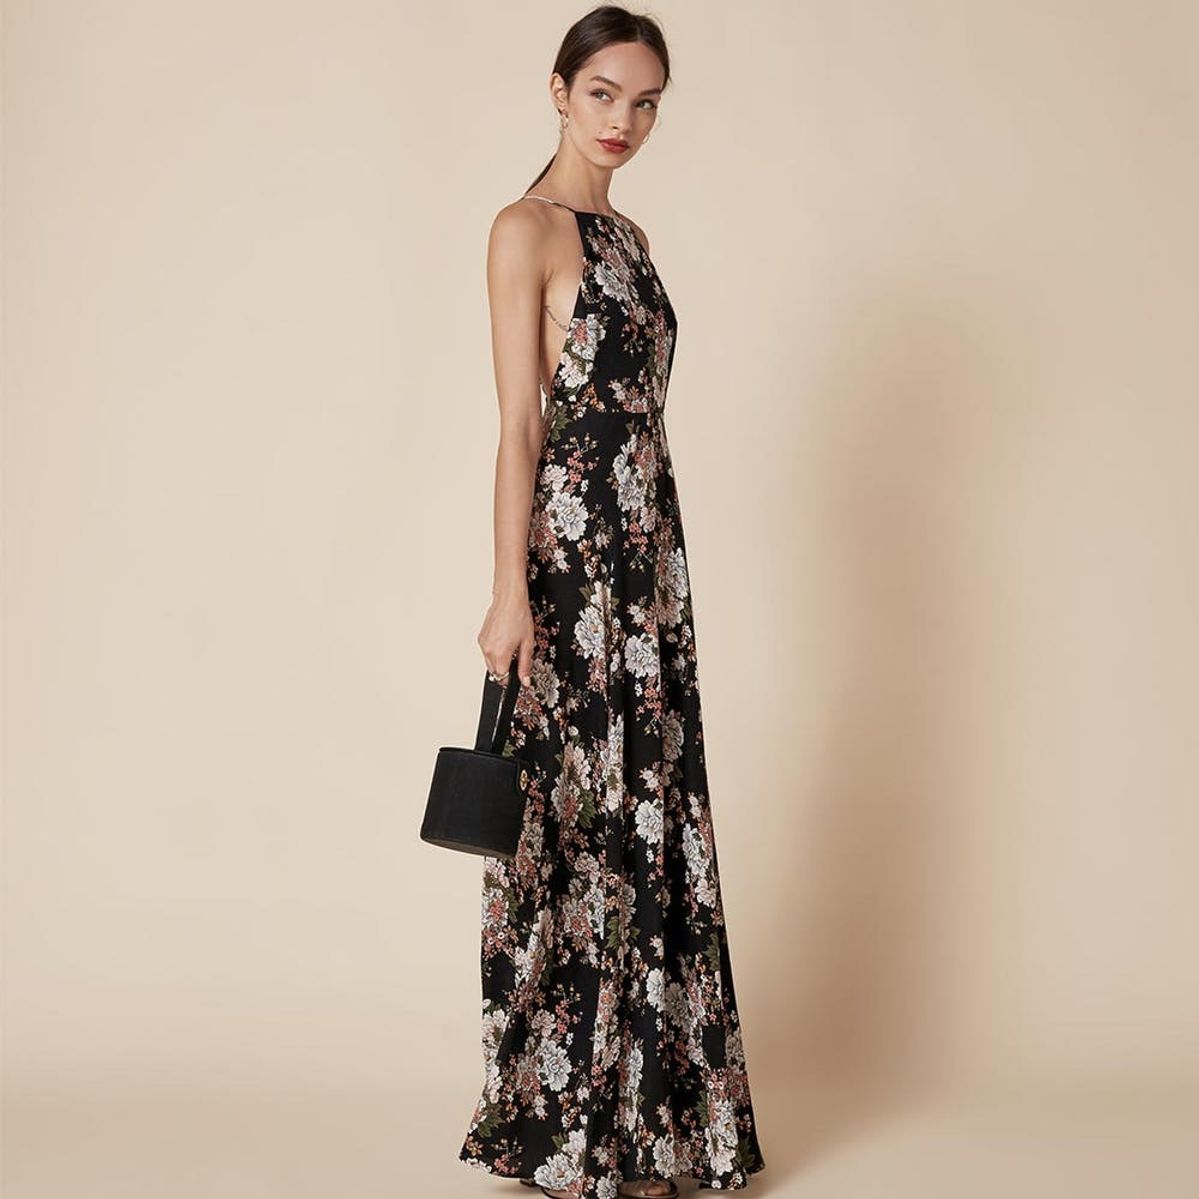 15 Perfect Pieces to Wear to a Fall Wedding